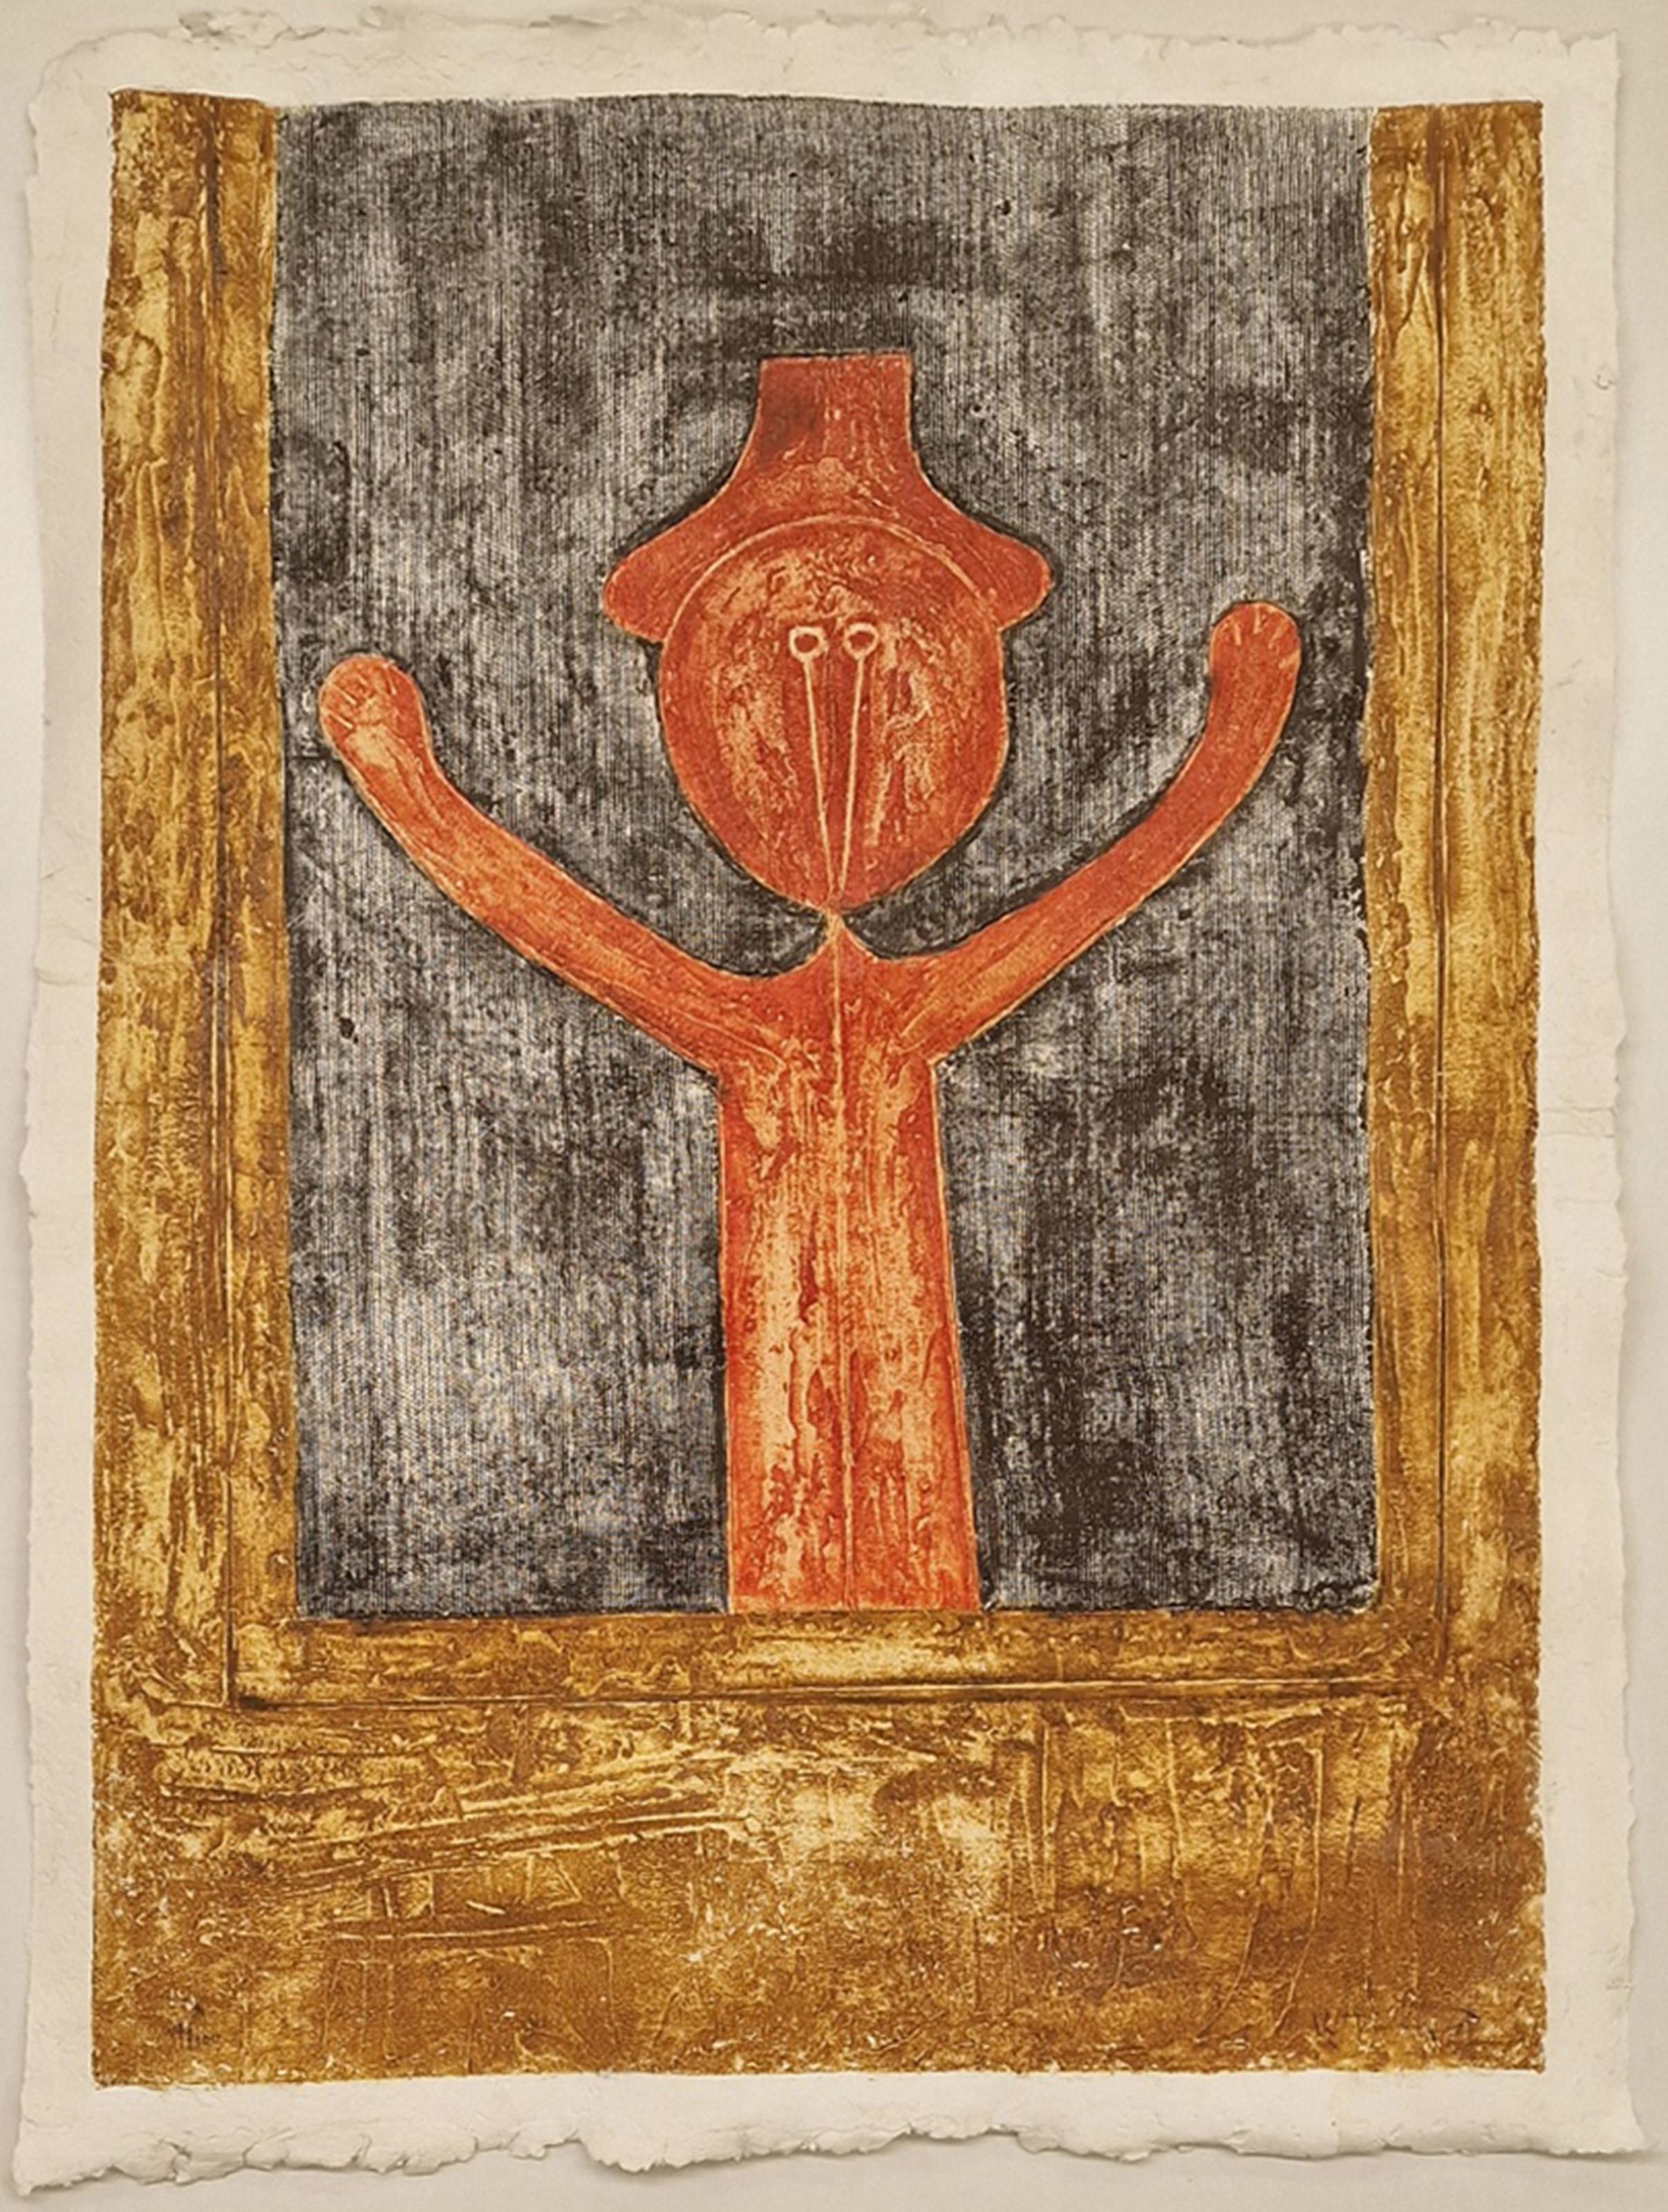 Rufino Tamayo, Mexican (1899 - 1991) -  Nino. Year: 1979, Medium: Mixograph, signed and numbered in pencil, Edition: 91/100, Size: 34.25 x 26.38 in. (87 x 66.99 cm), Printer: Taller de Grafica Mexicana, Reference: Pereda 1979, Description: A